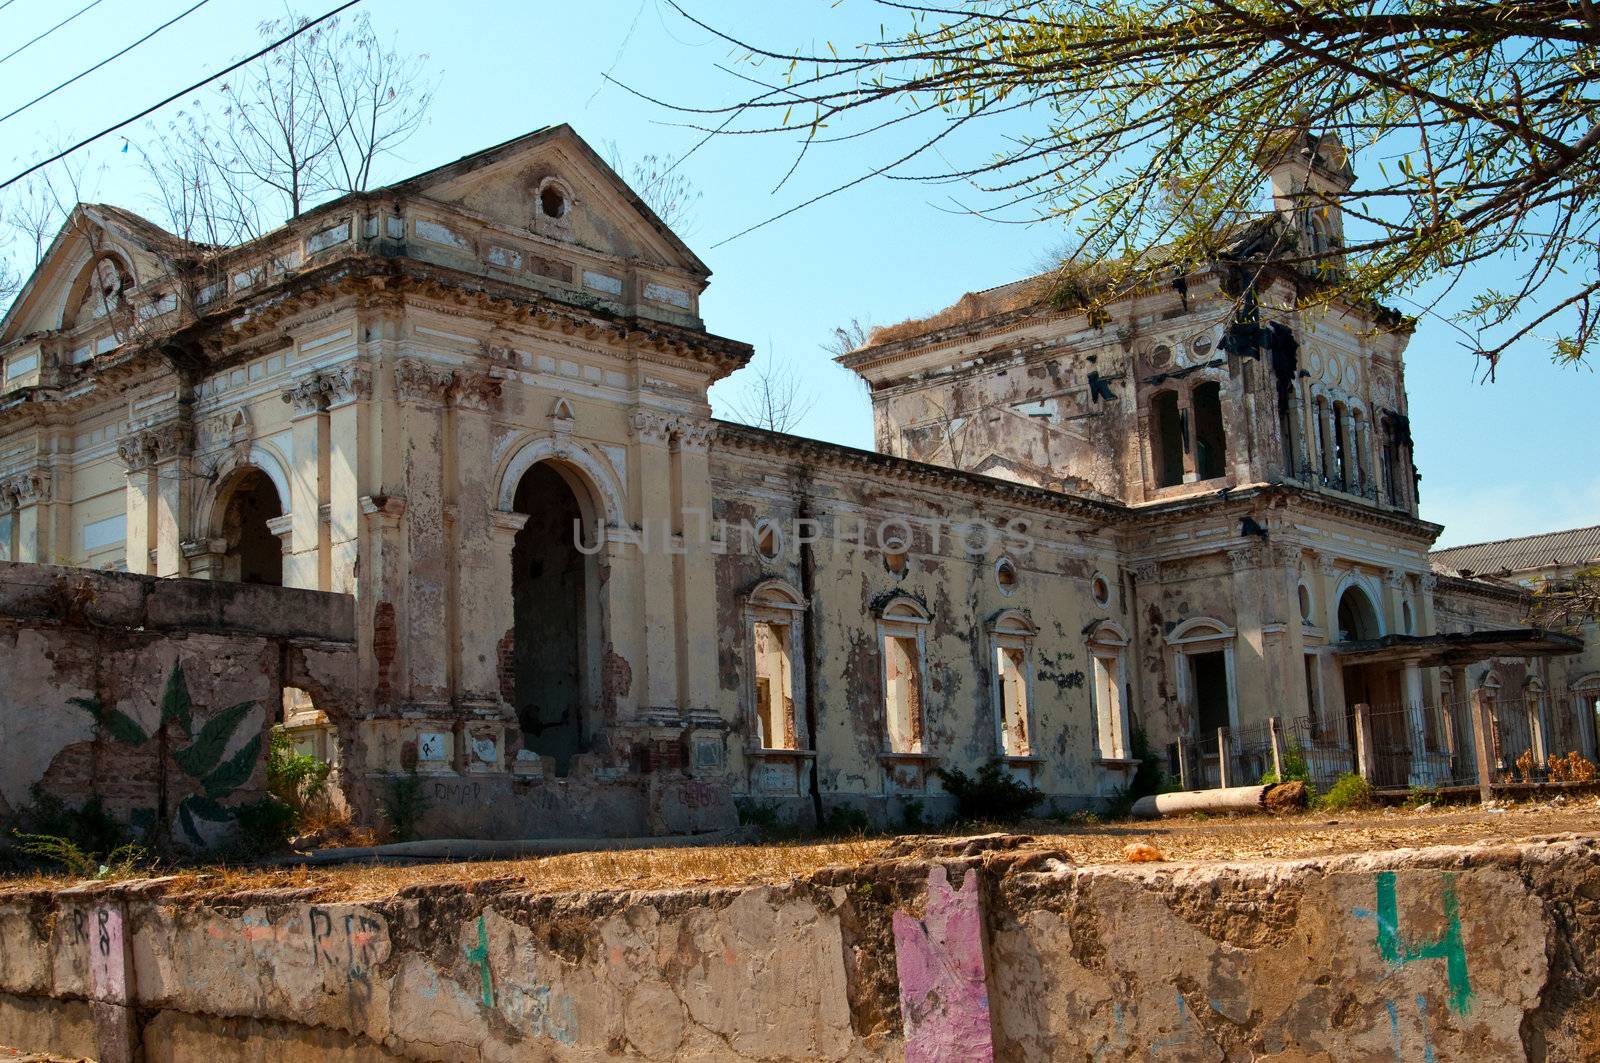 The picture of the ruins of the cathedrral in Granada, Nicaragua